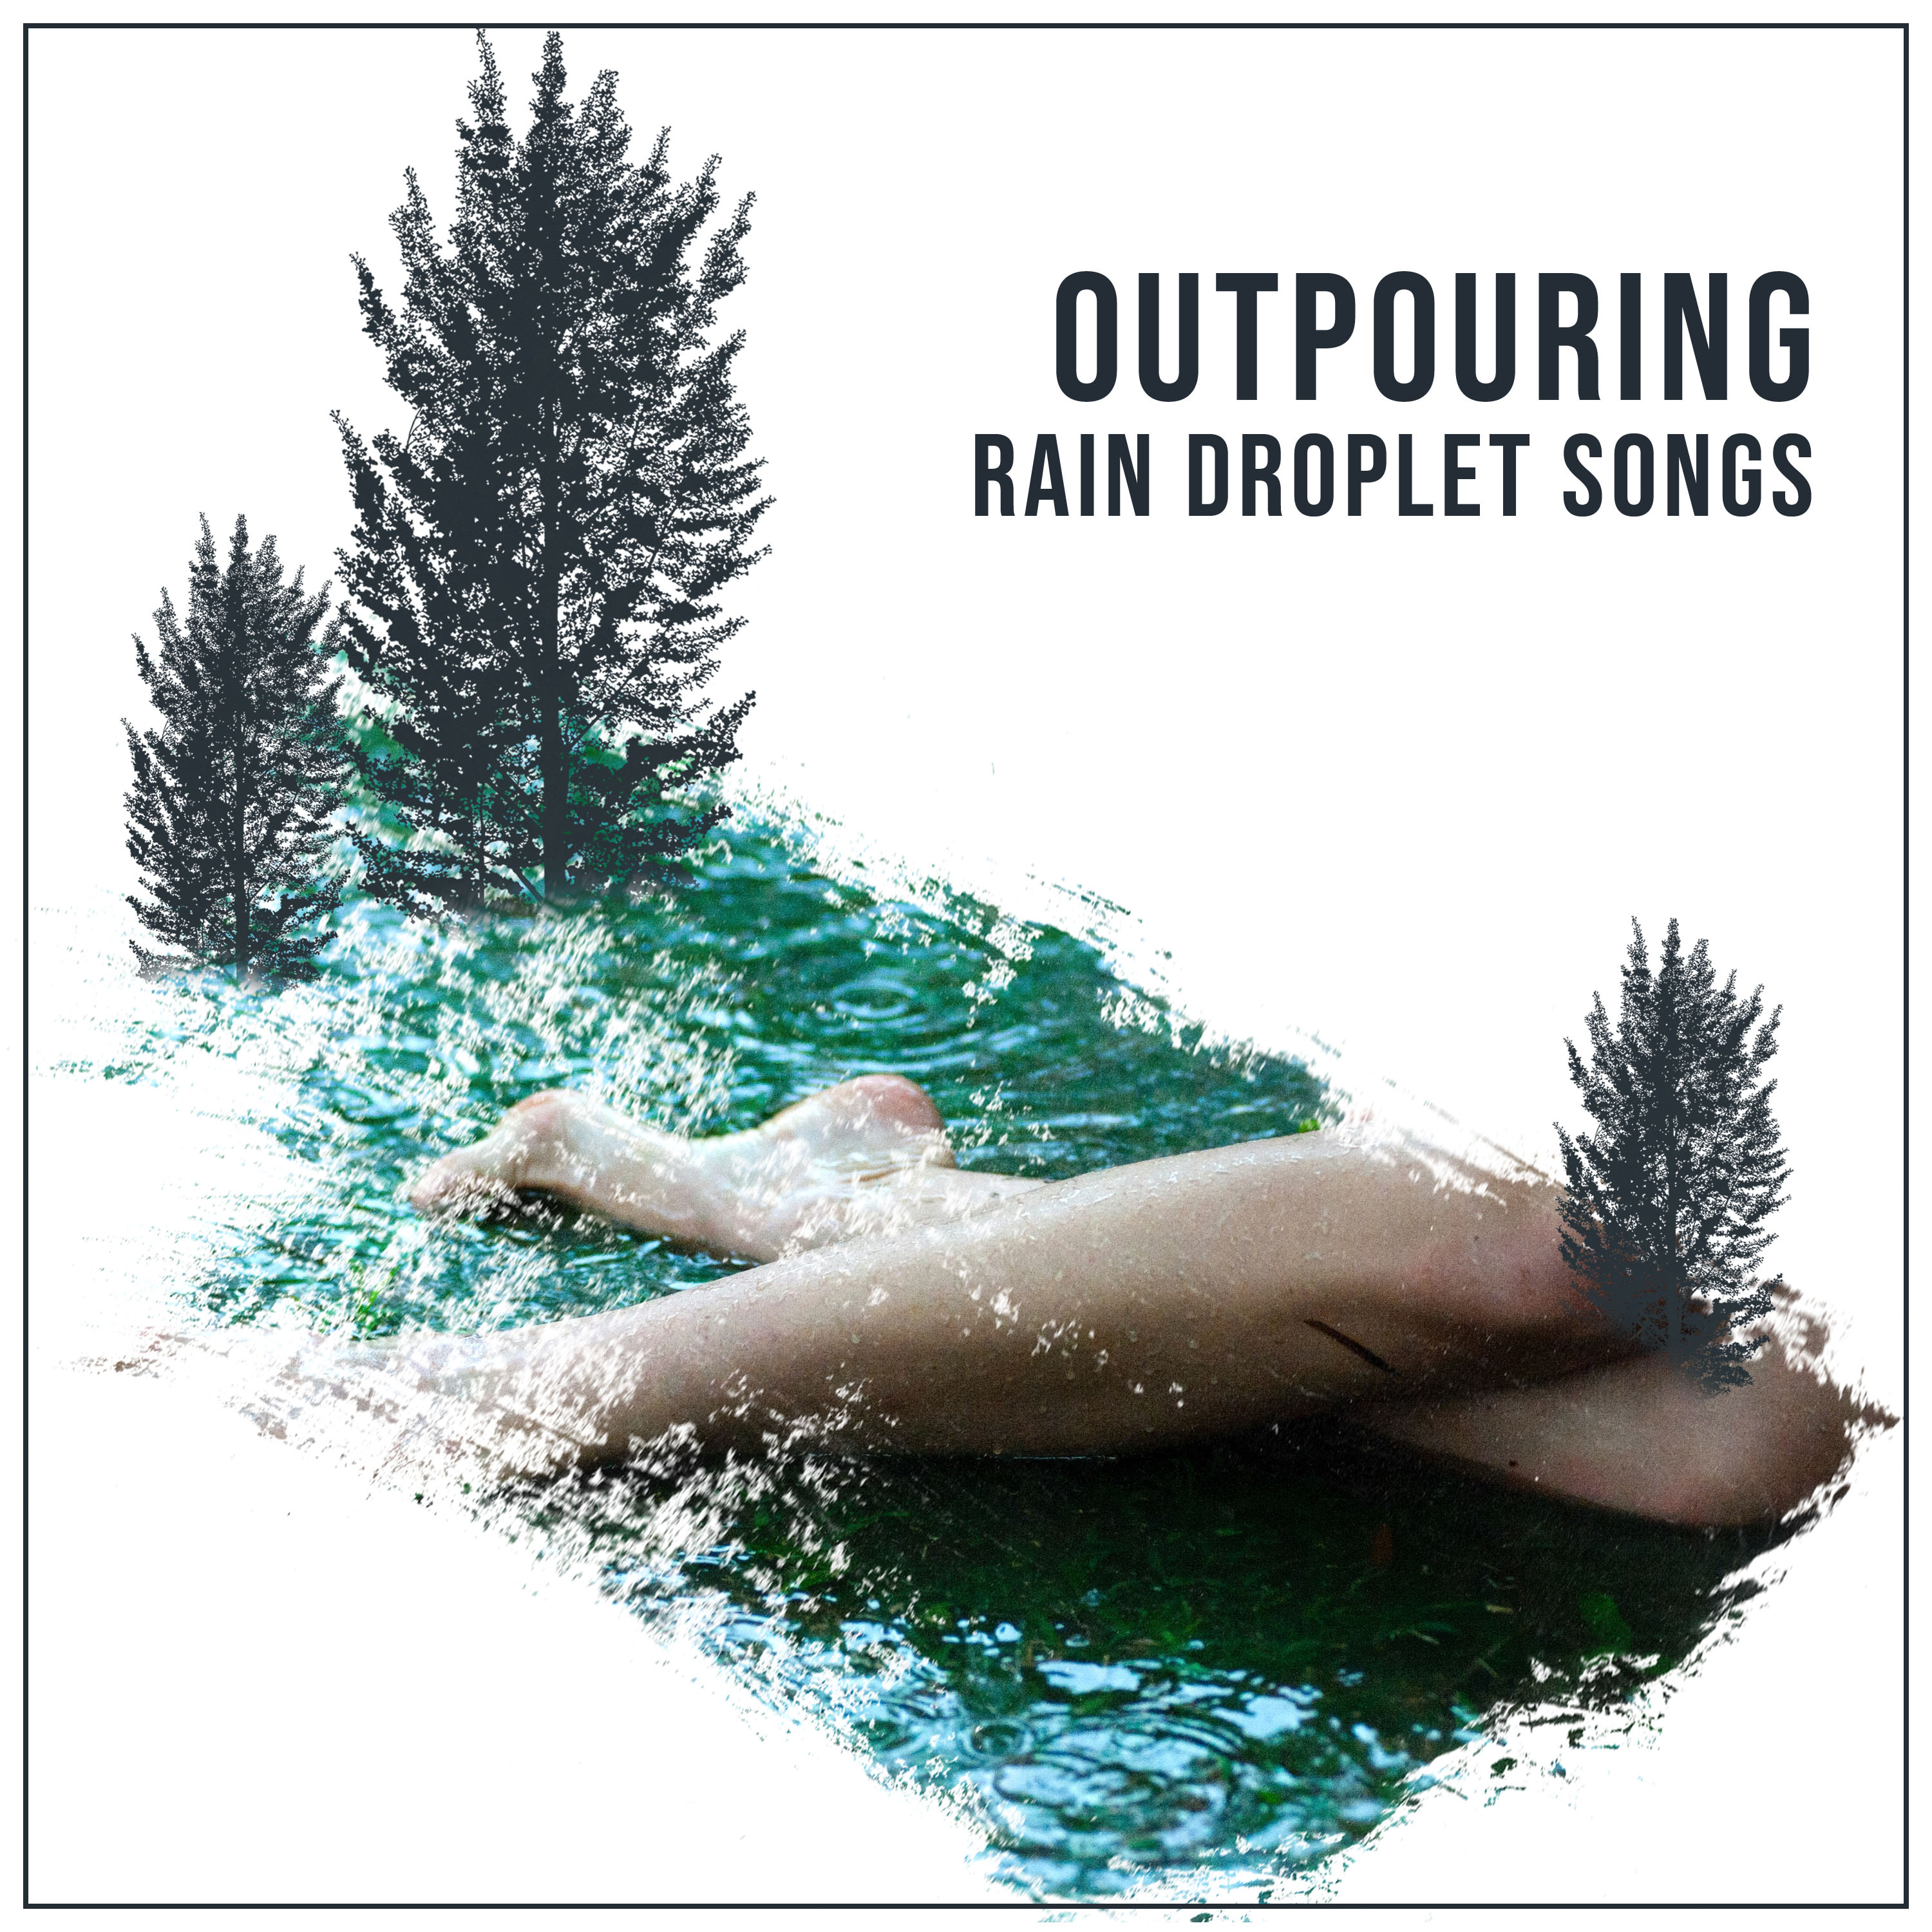 #12 Outpouring Rain Droplet Songs for Relaxing with Nature